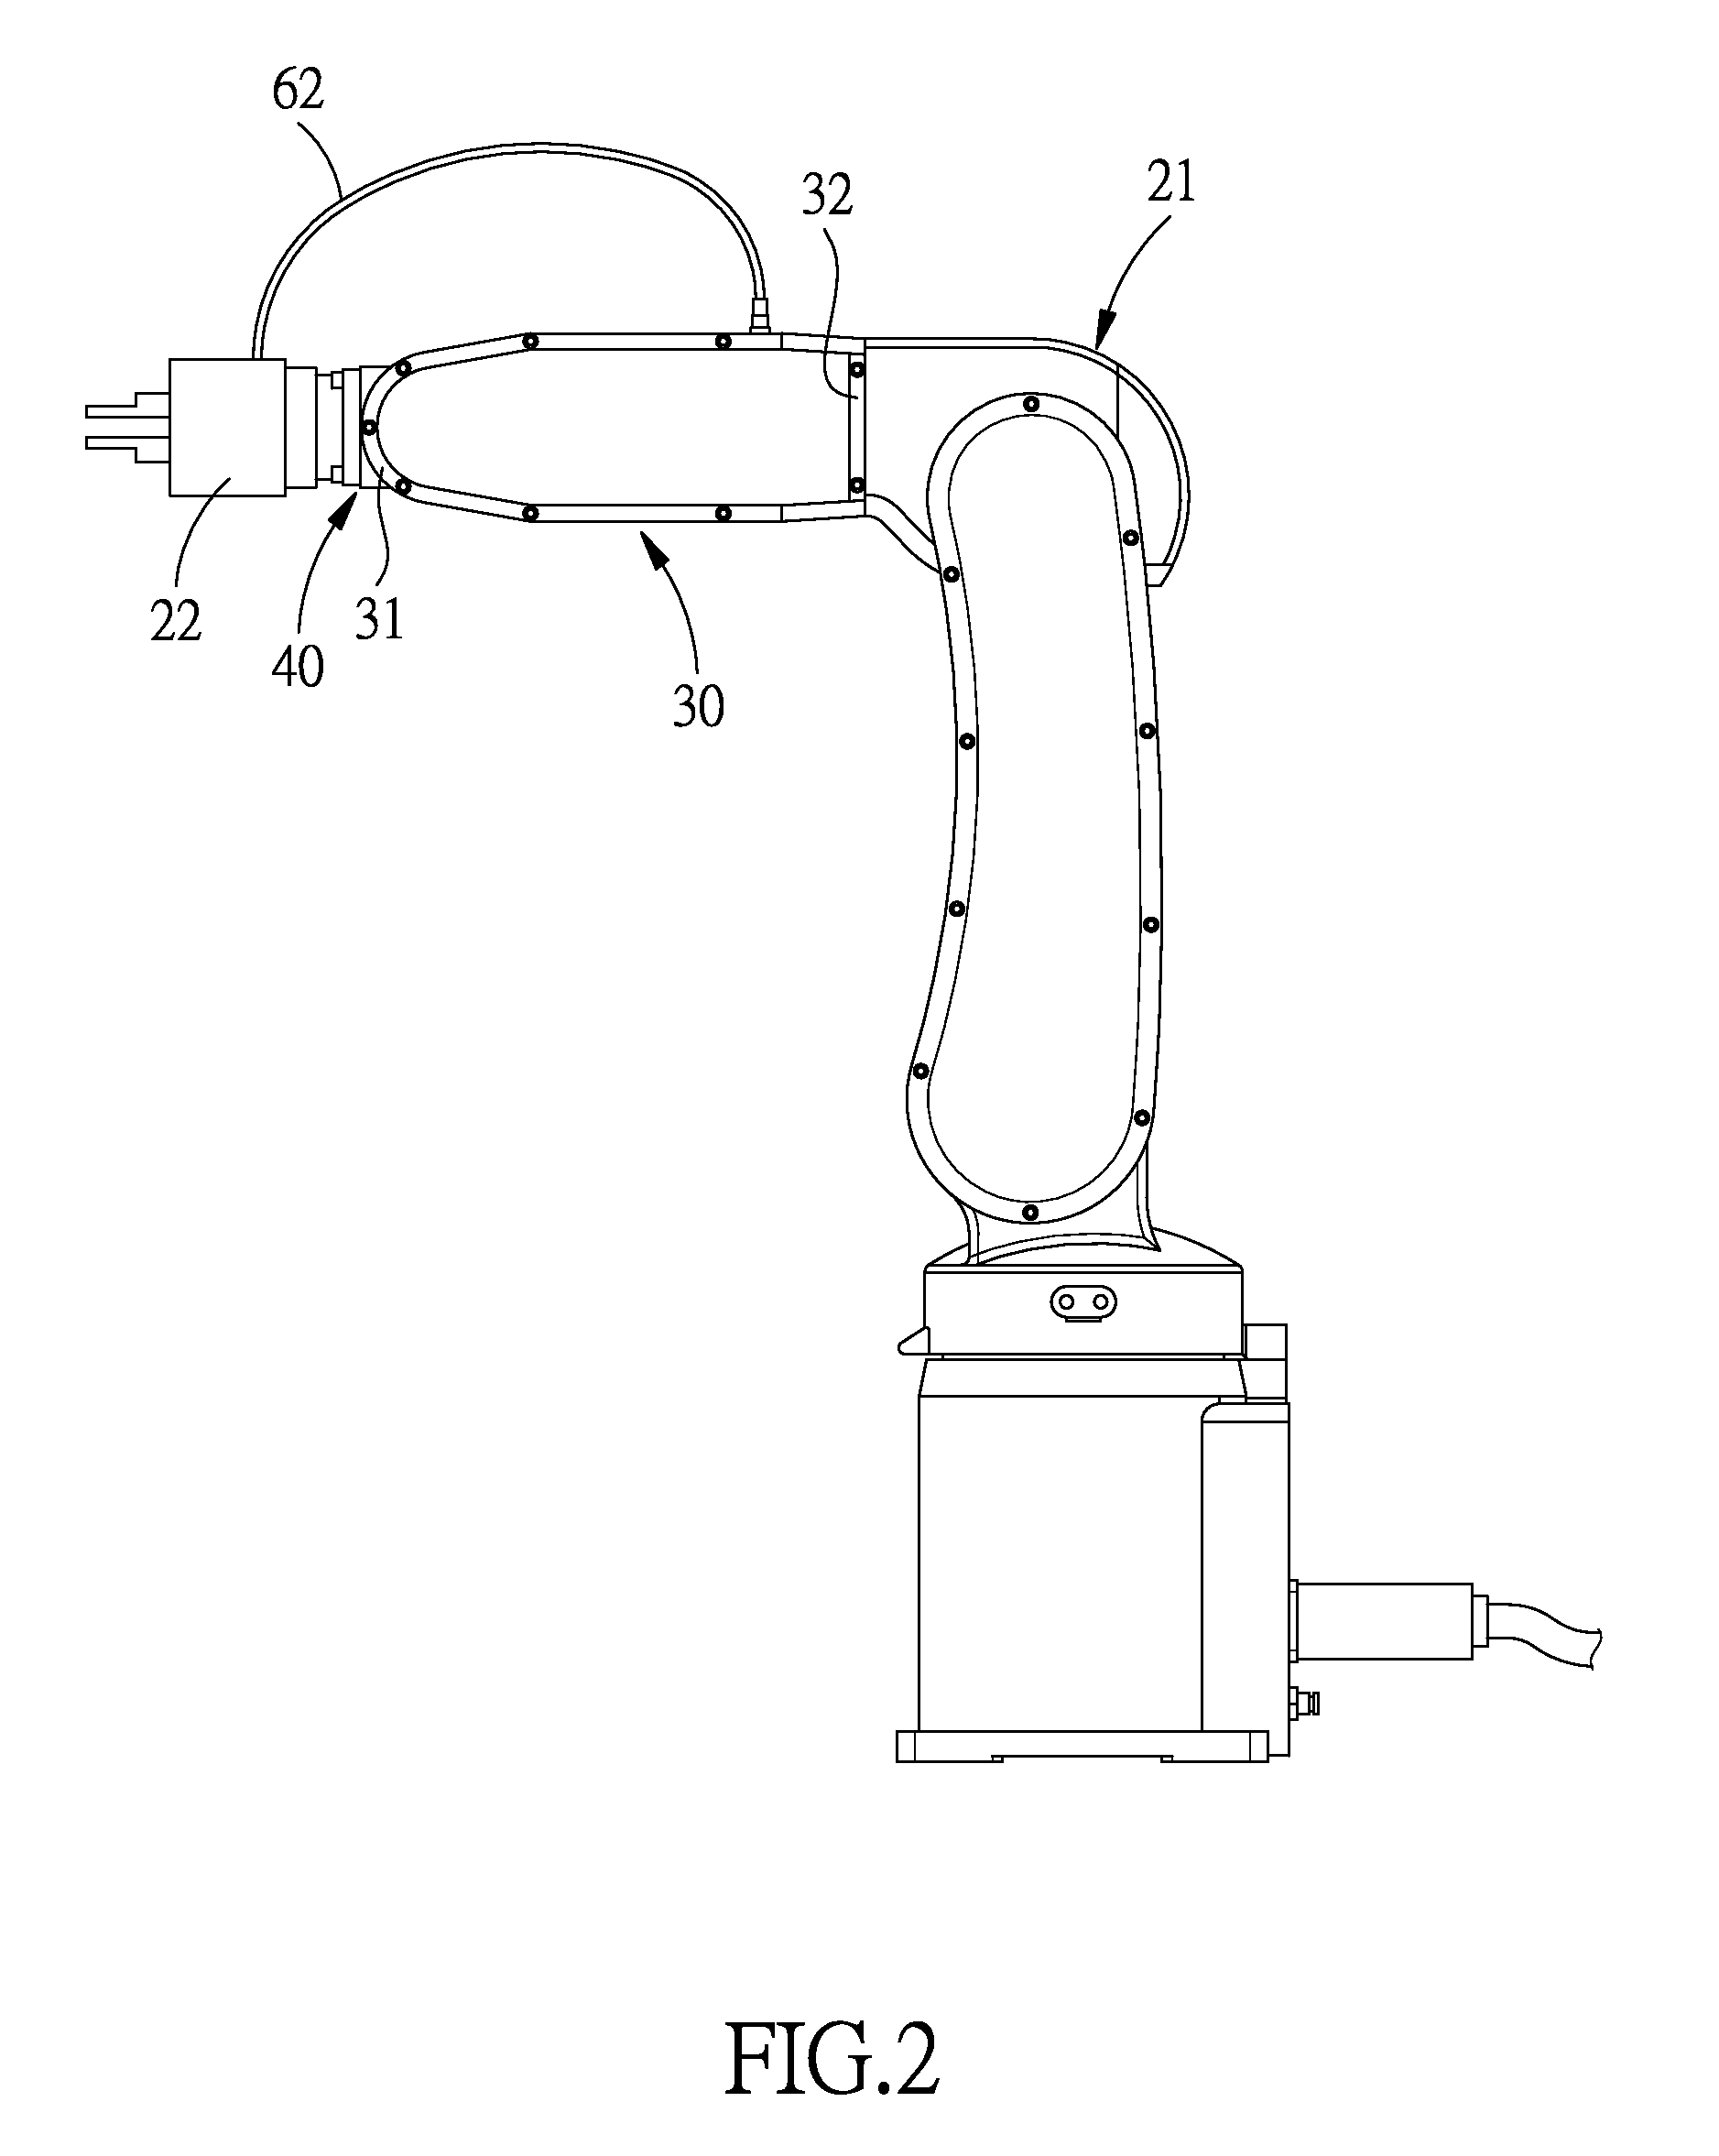 Wrist structure for an articulated robotic arm